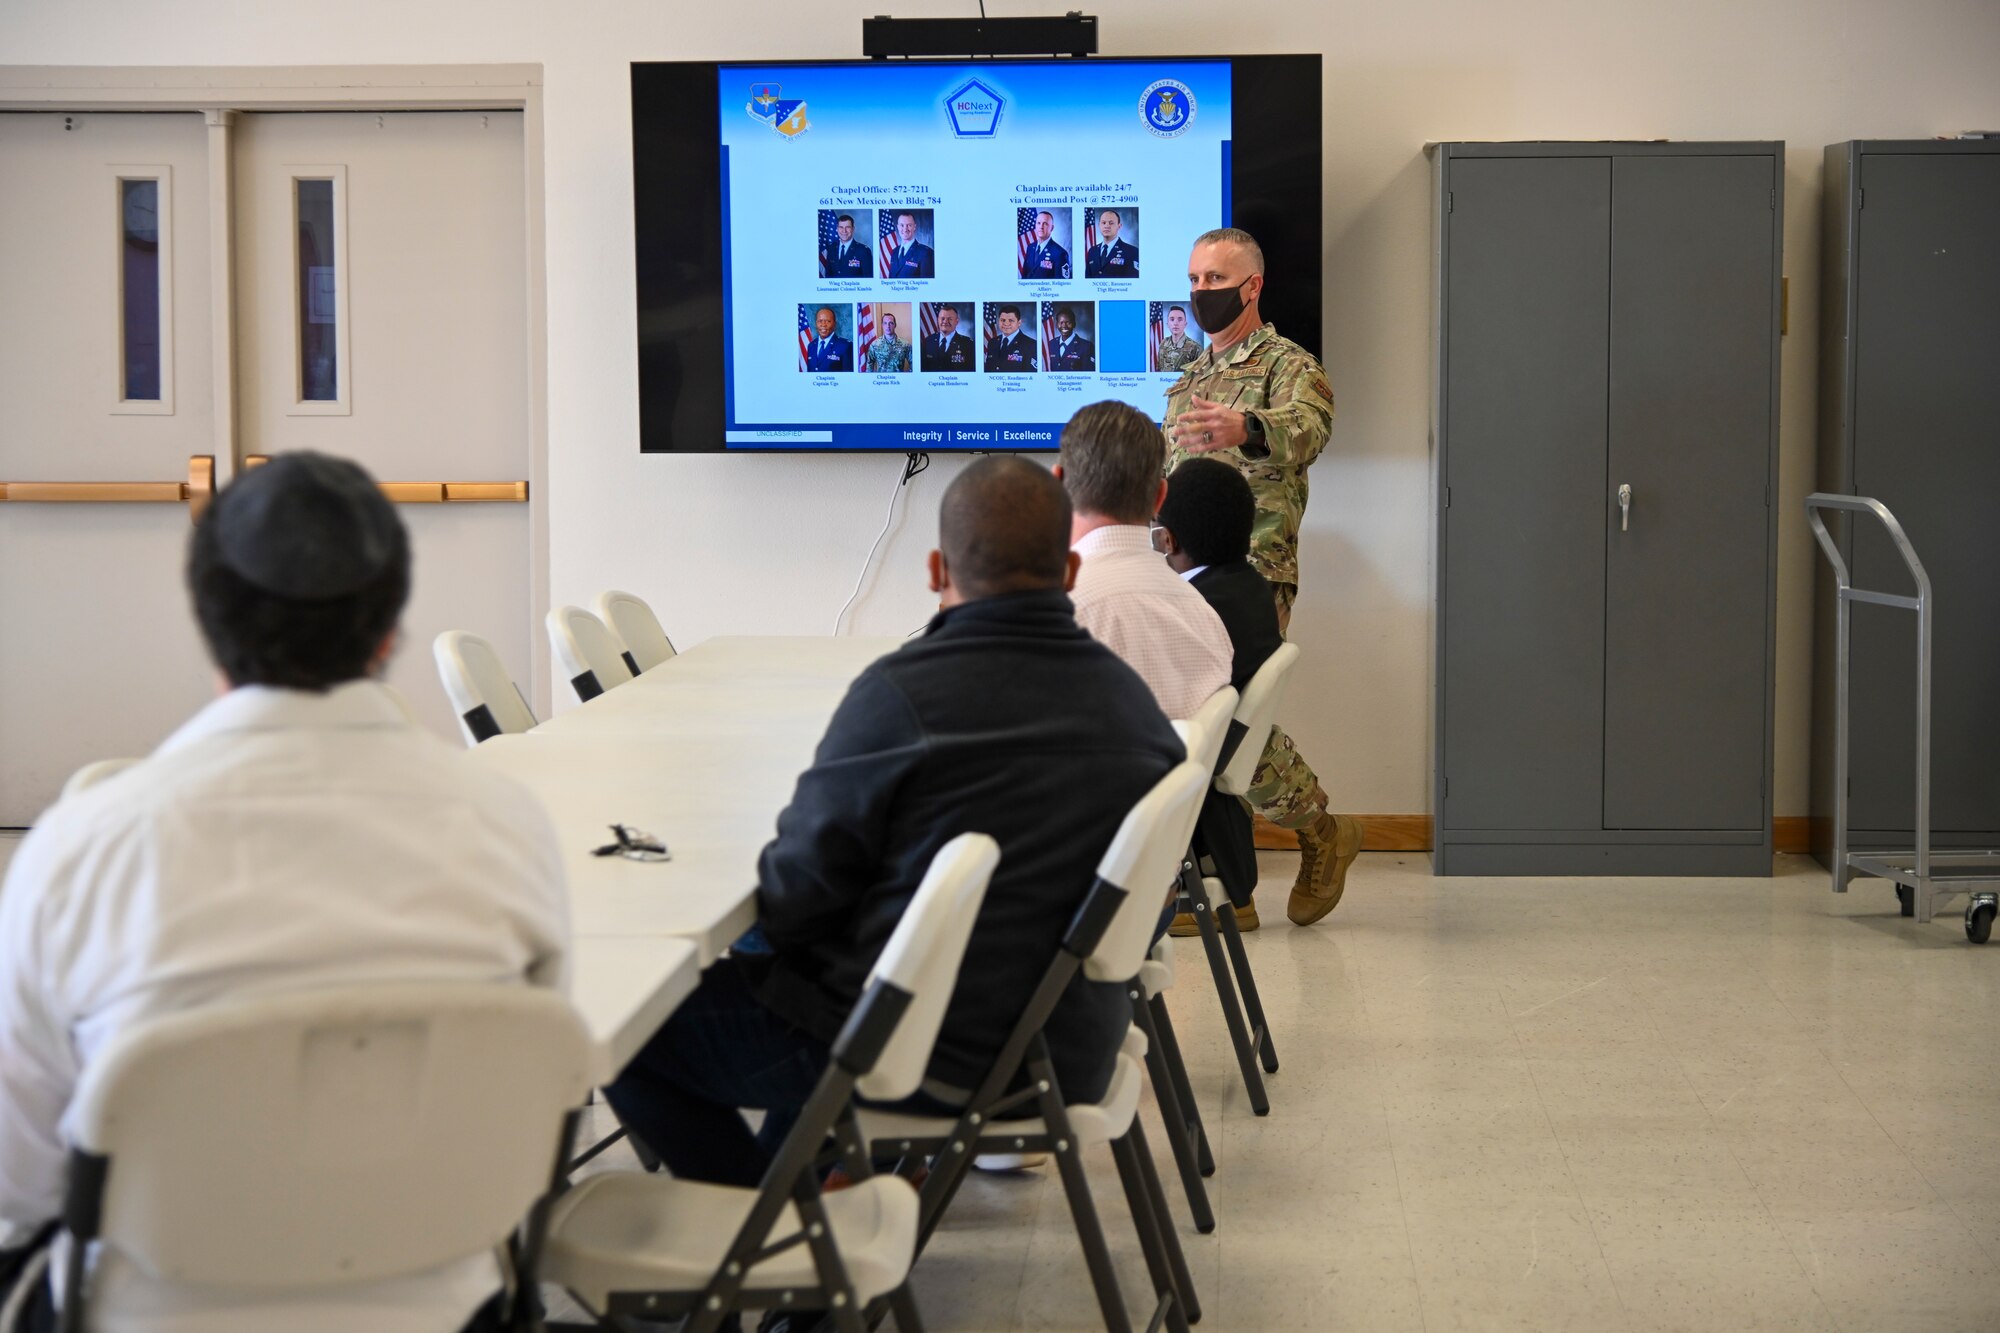 Master Sgt. Andrew Morgan, 49th Wing chaplain superintendent, briefs local clergy during a Clergy Day event, Nov. 4, 2021, on Holloman Air Force Base, New Mexico. If an Airman or Guardian requests a religious rite from a Chaplain that does not share the same denomination or faith tradition, the Chaplain can put that person in touch with the Civilian Religious leader of their faith. (U.S. Air Force photo by Airman 1st Class Jessica Sanchez-Chen)